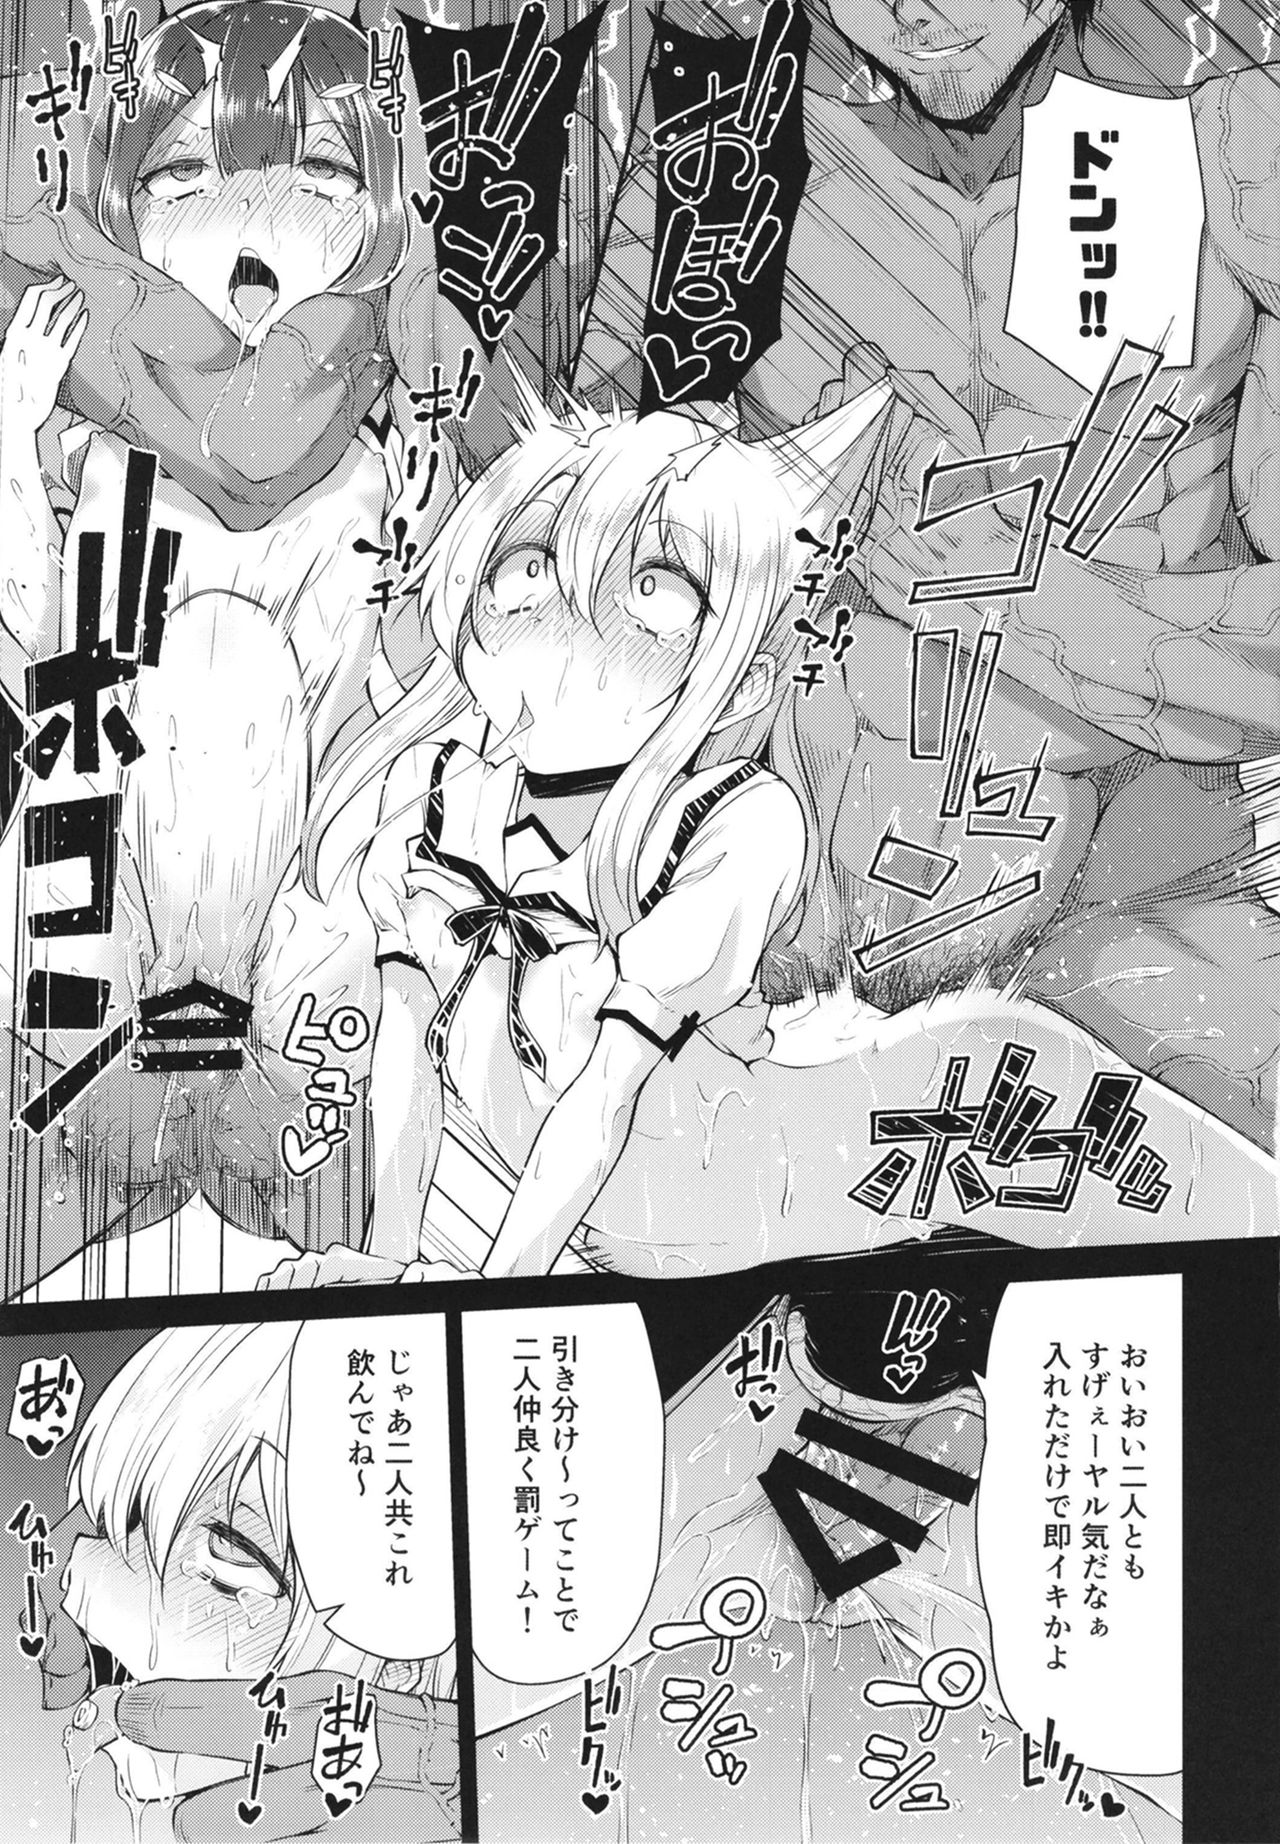 [Kitsuneya (Leafy)] Mahou Shoujo to Shiawase Game - Magical Girl and Happiness Game (Fate/Grand Order, Fate/kaleid liner Prisma Illya) [Digital] page 15 full